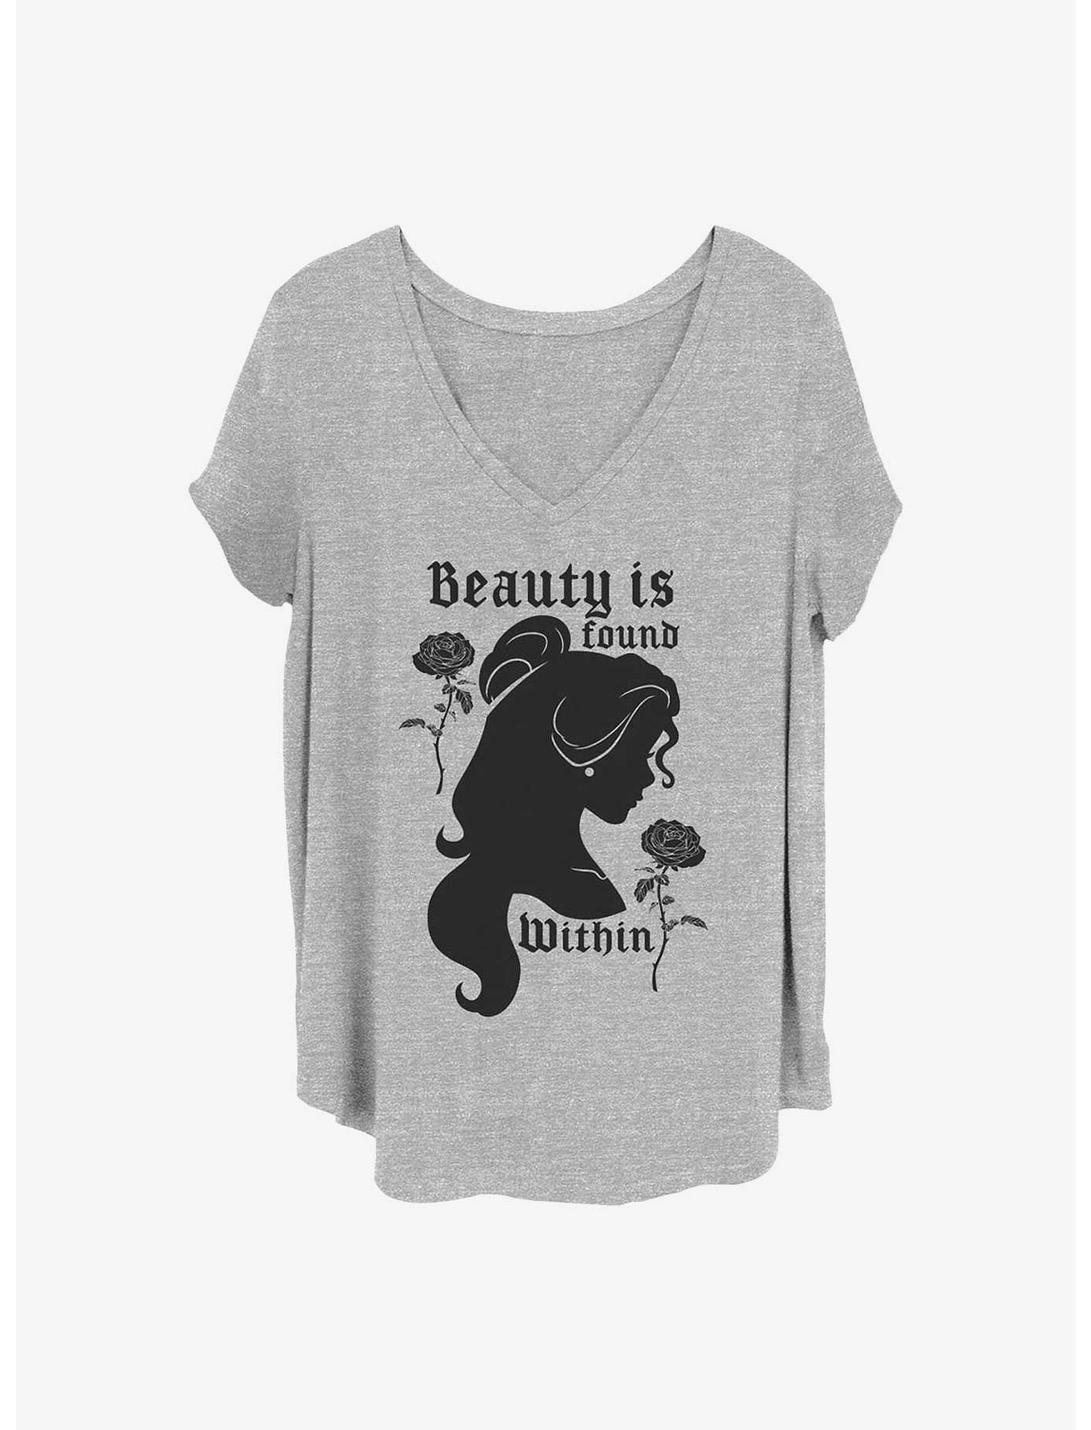 Disney Beauty and the Beast Belle Within Girls T-Shirt Plus Size, HEATHER GR, hi-res